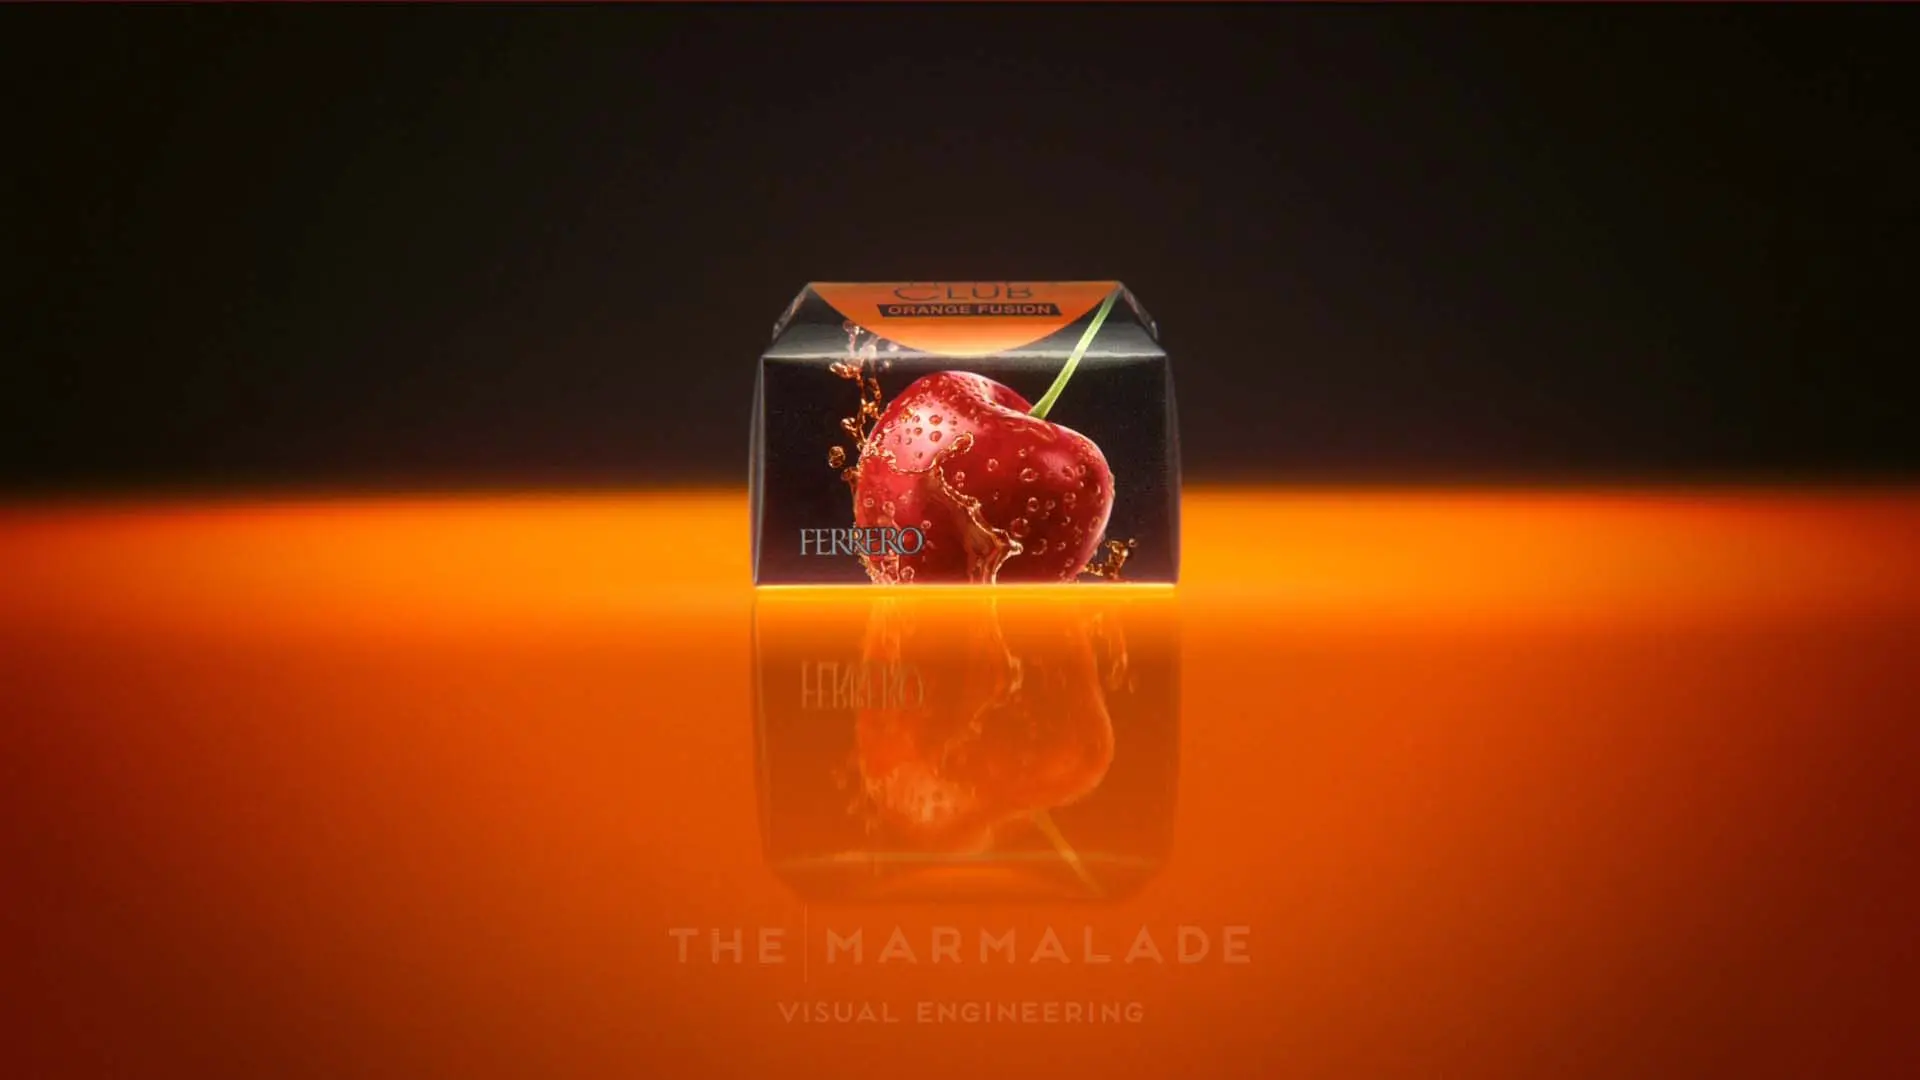 
            Client: FERRERO;
            Product: Mon Chéri Orangefusion; 
            Concept: FERRERO Pubbliregia; 
            Production + Post-production: The Marmalade; 
            Director: Karina Taira; 
            ;
            My role encompassed the modeling, texturing, shading, lighting, and rendering of the packaged product.